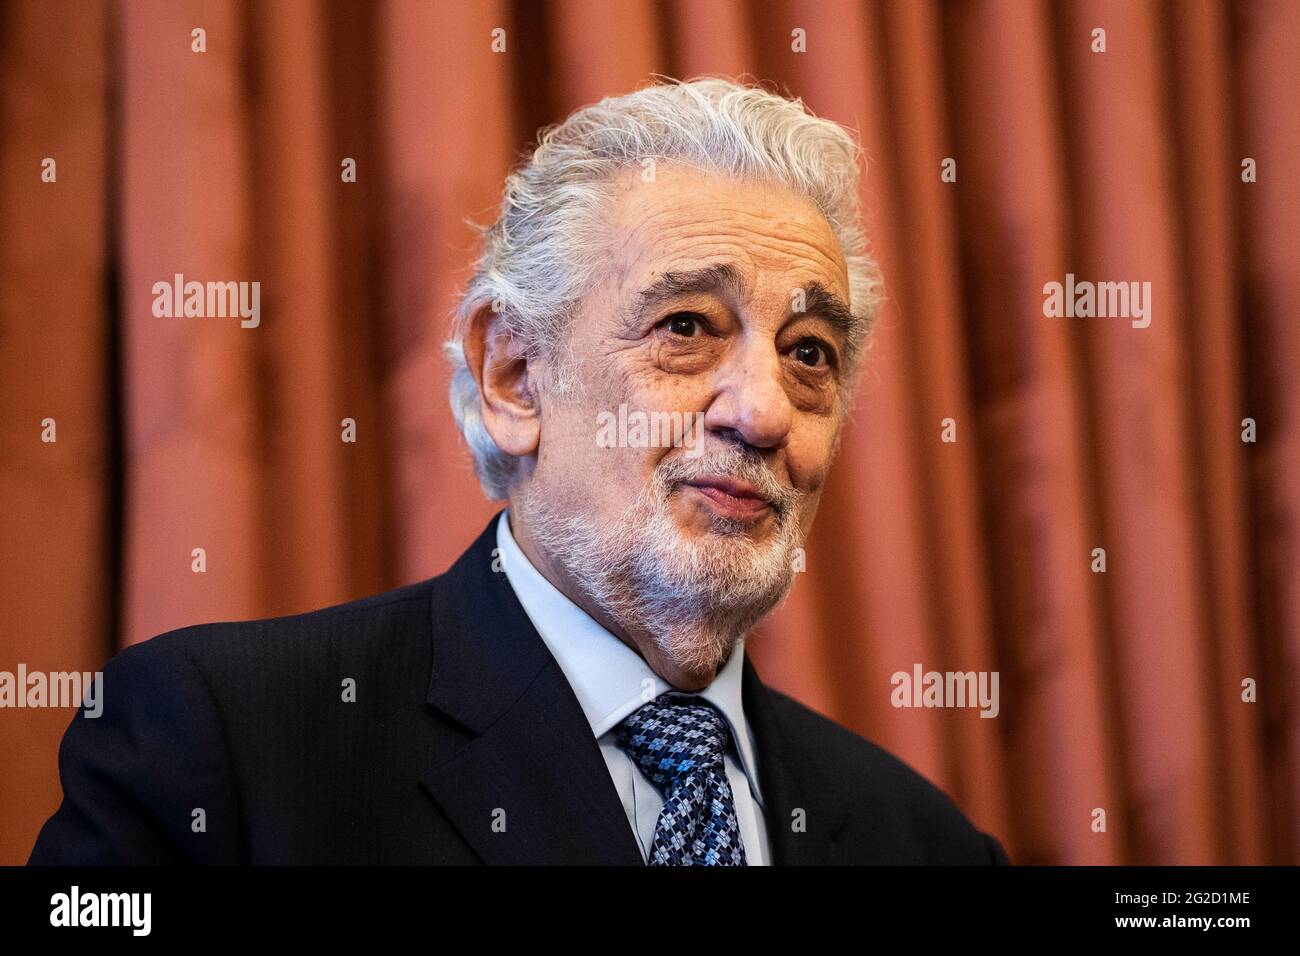 Madrid, Spain. 10th June, 2021. The tenor Placido Domingo makes a speech as he receives the title of 'Honorary Ambassador of the World Heritage of Spain' at the Teatro Real, Madrid. Domingo receives this title coinciding with his return to Spain to perform at two concerts, in Madrid and Marbella. The emblem is given to him by the association ADIPROPE (Association for the Diffusion and Promotion of the World Heritage of Spain), dedicated to caring for and promoting knowledge of Spain's World Heritage. (Photo by Oscar Fuentes/SOPA Images/Sipa USA) Credit: Sipa USA/Alamy Live News Stock Photo